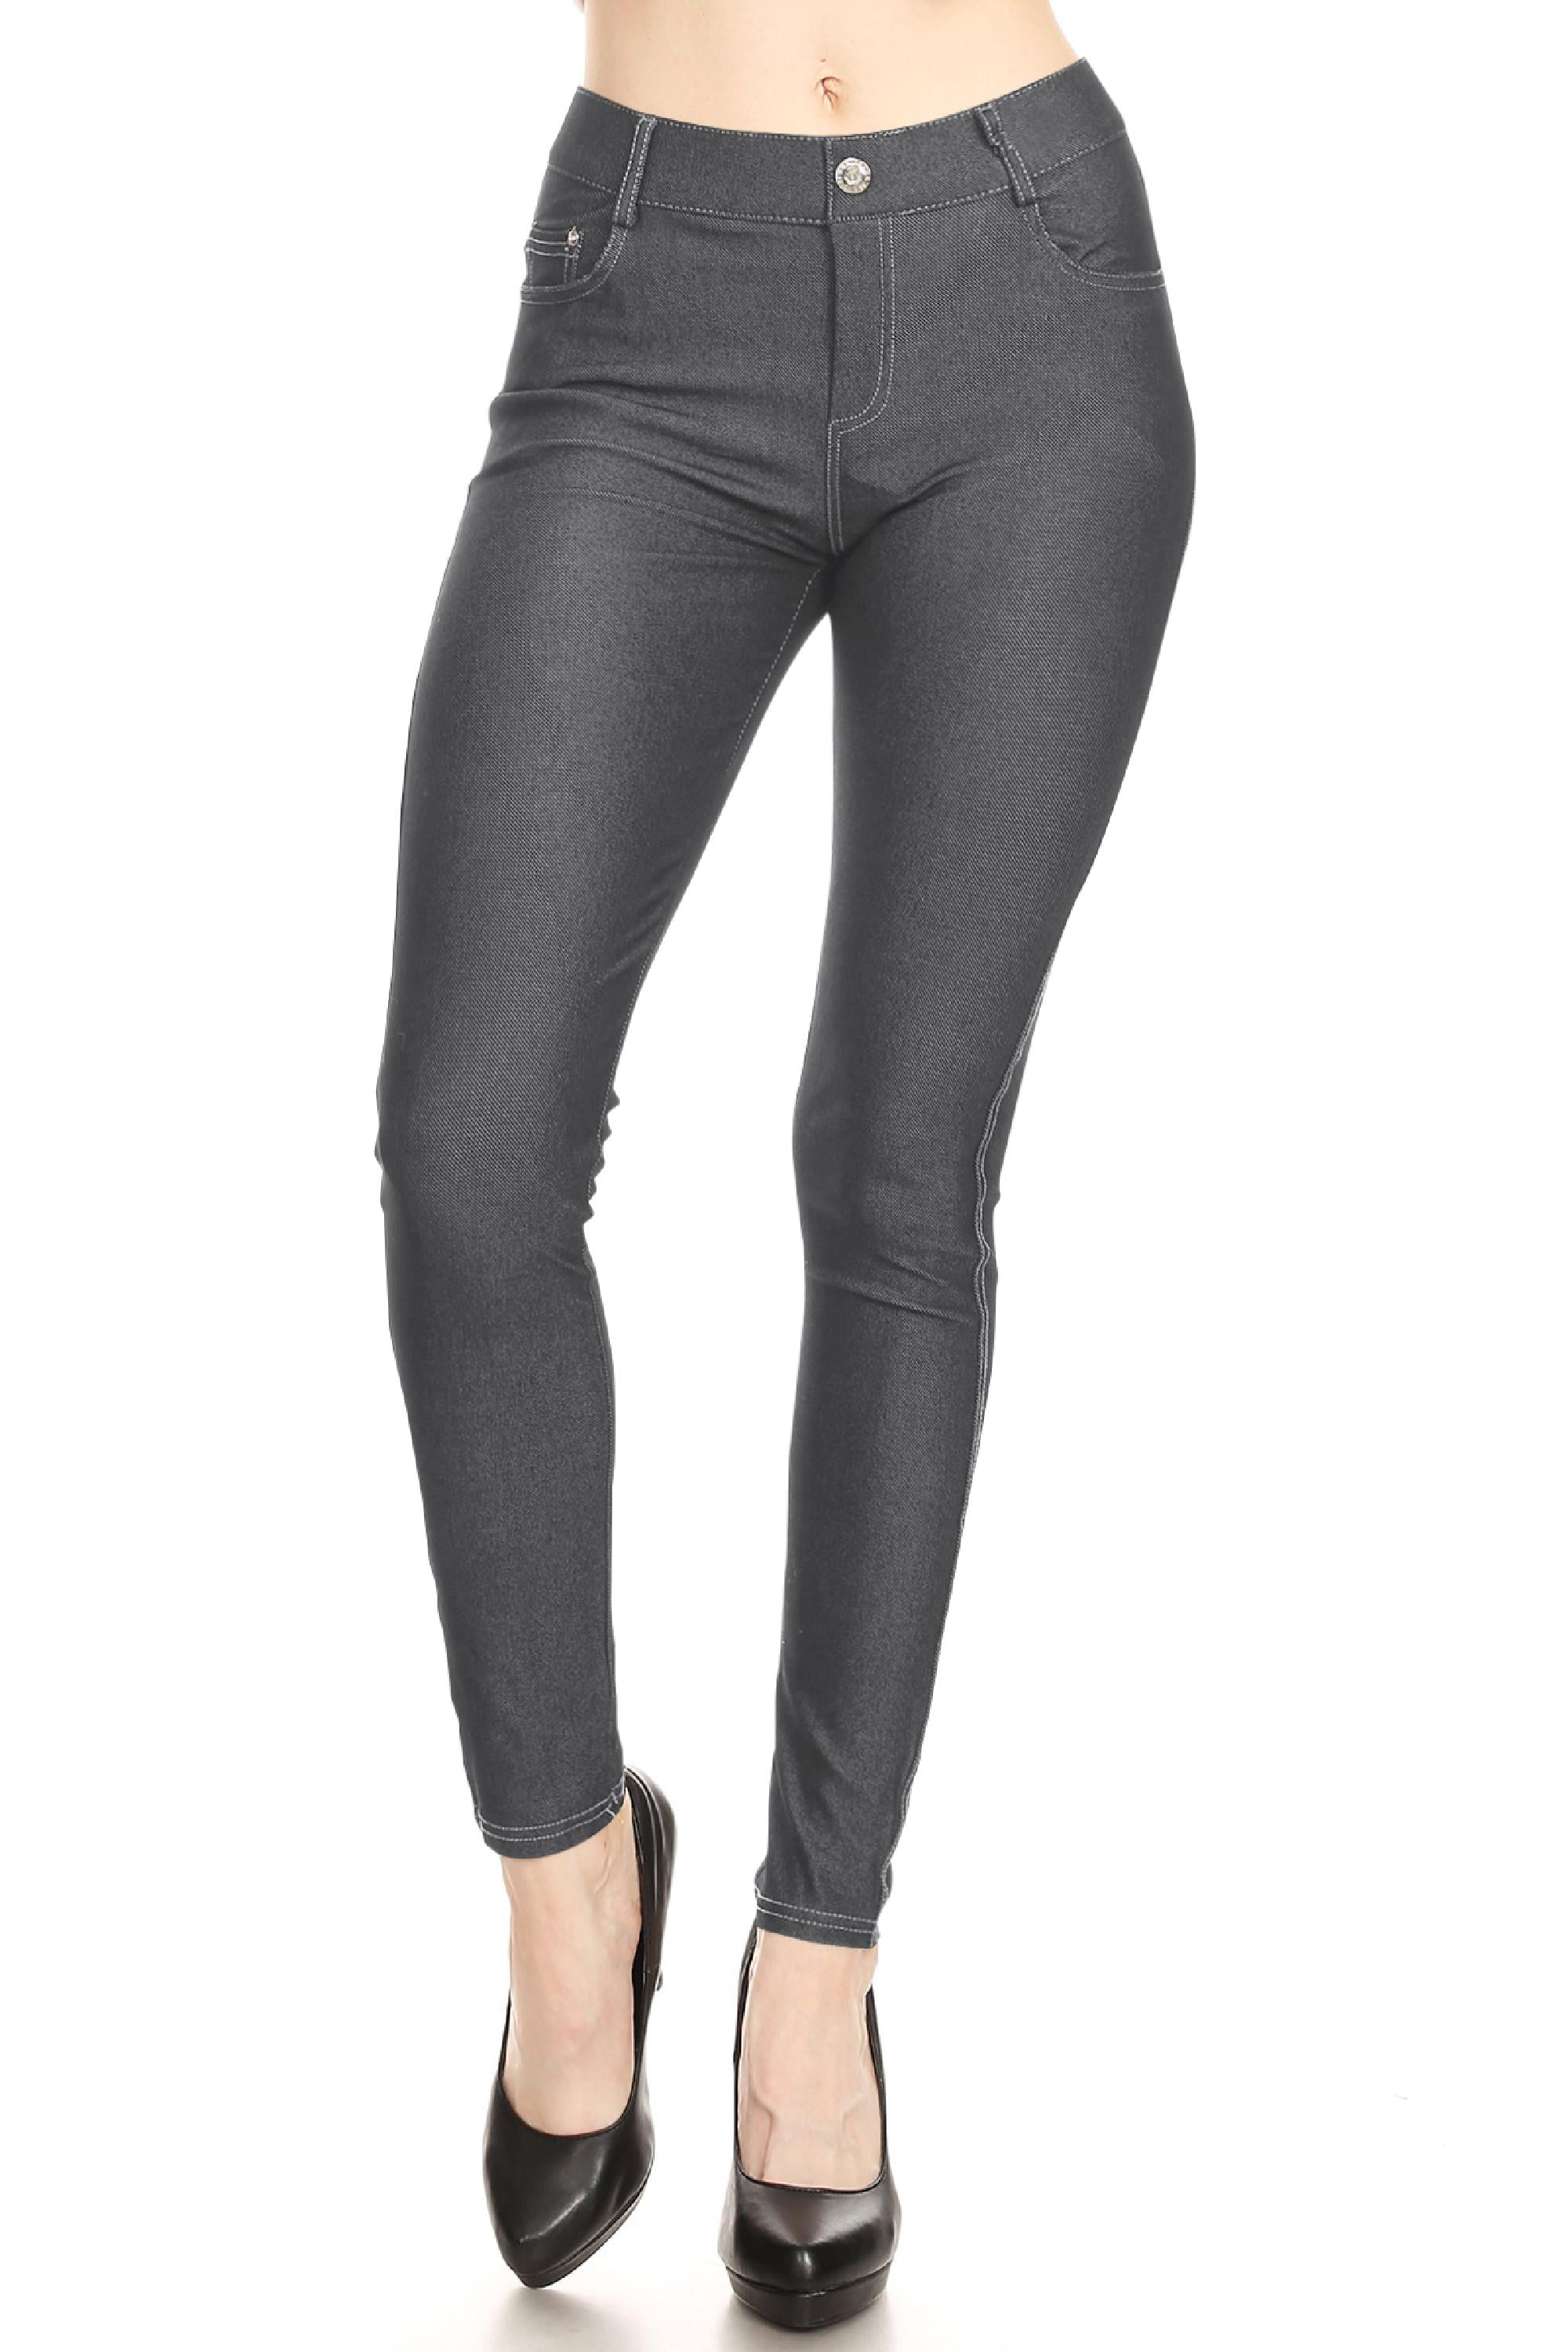 Women's Stretch Jeggings with Pockets Slimming Pull On Jean